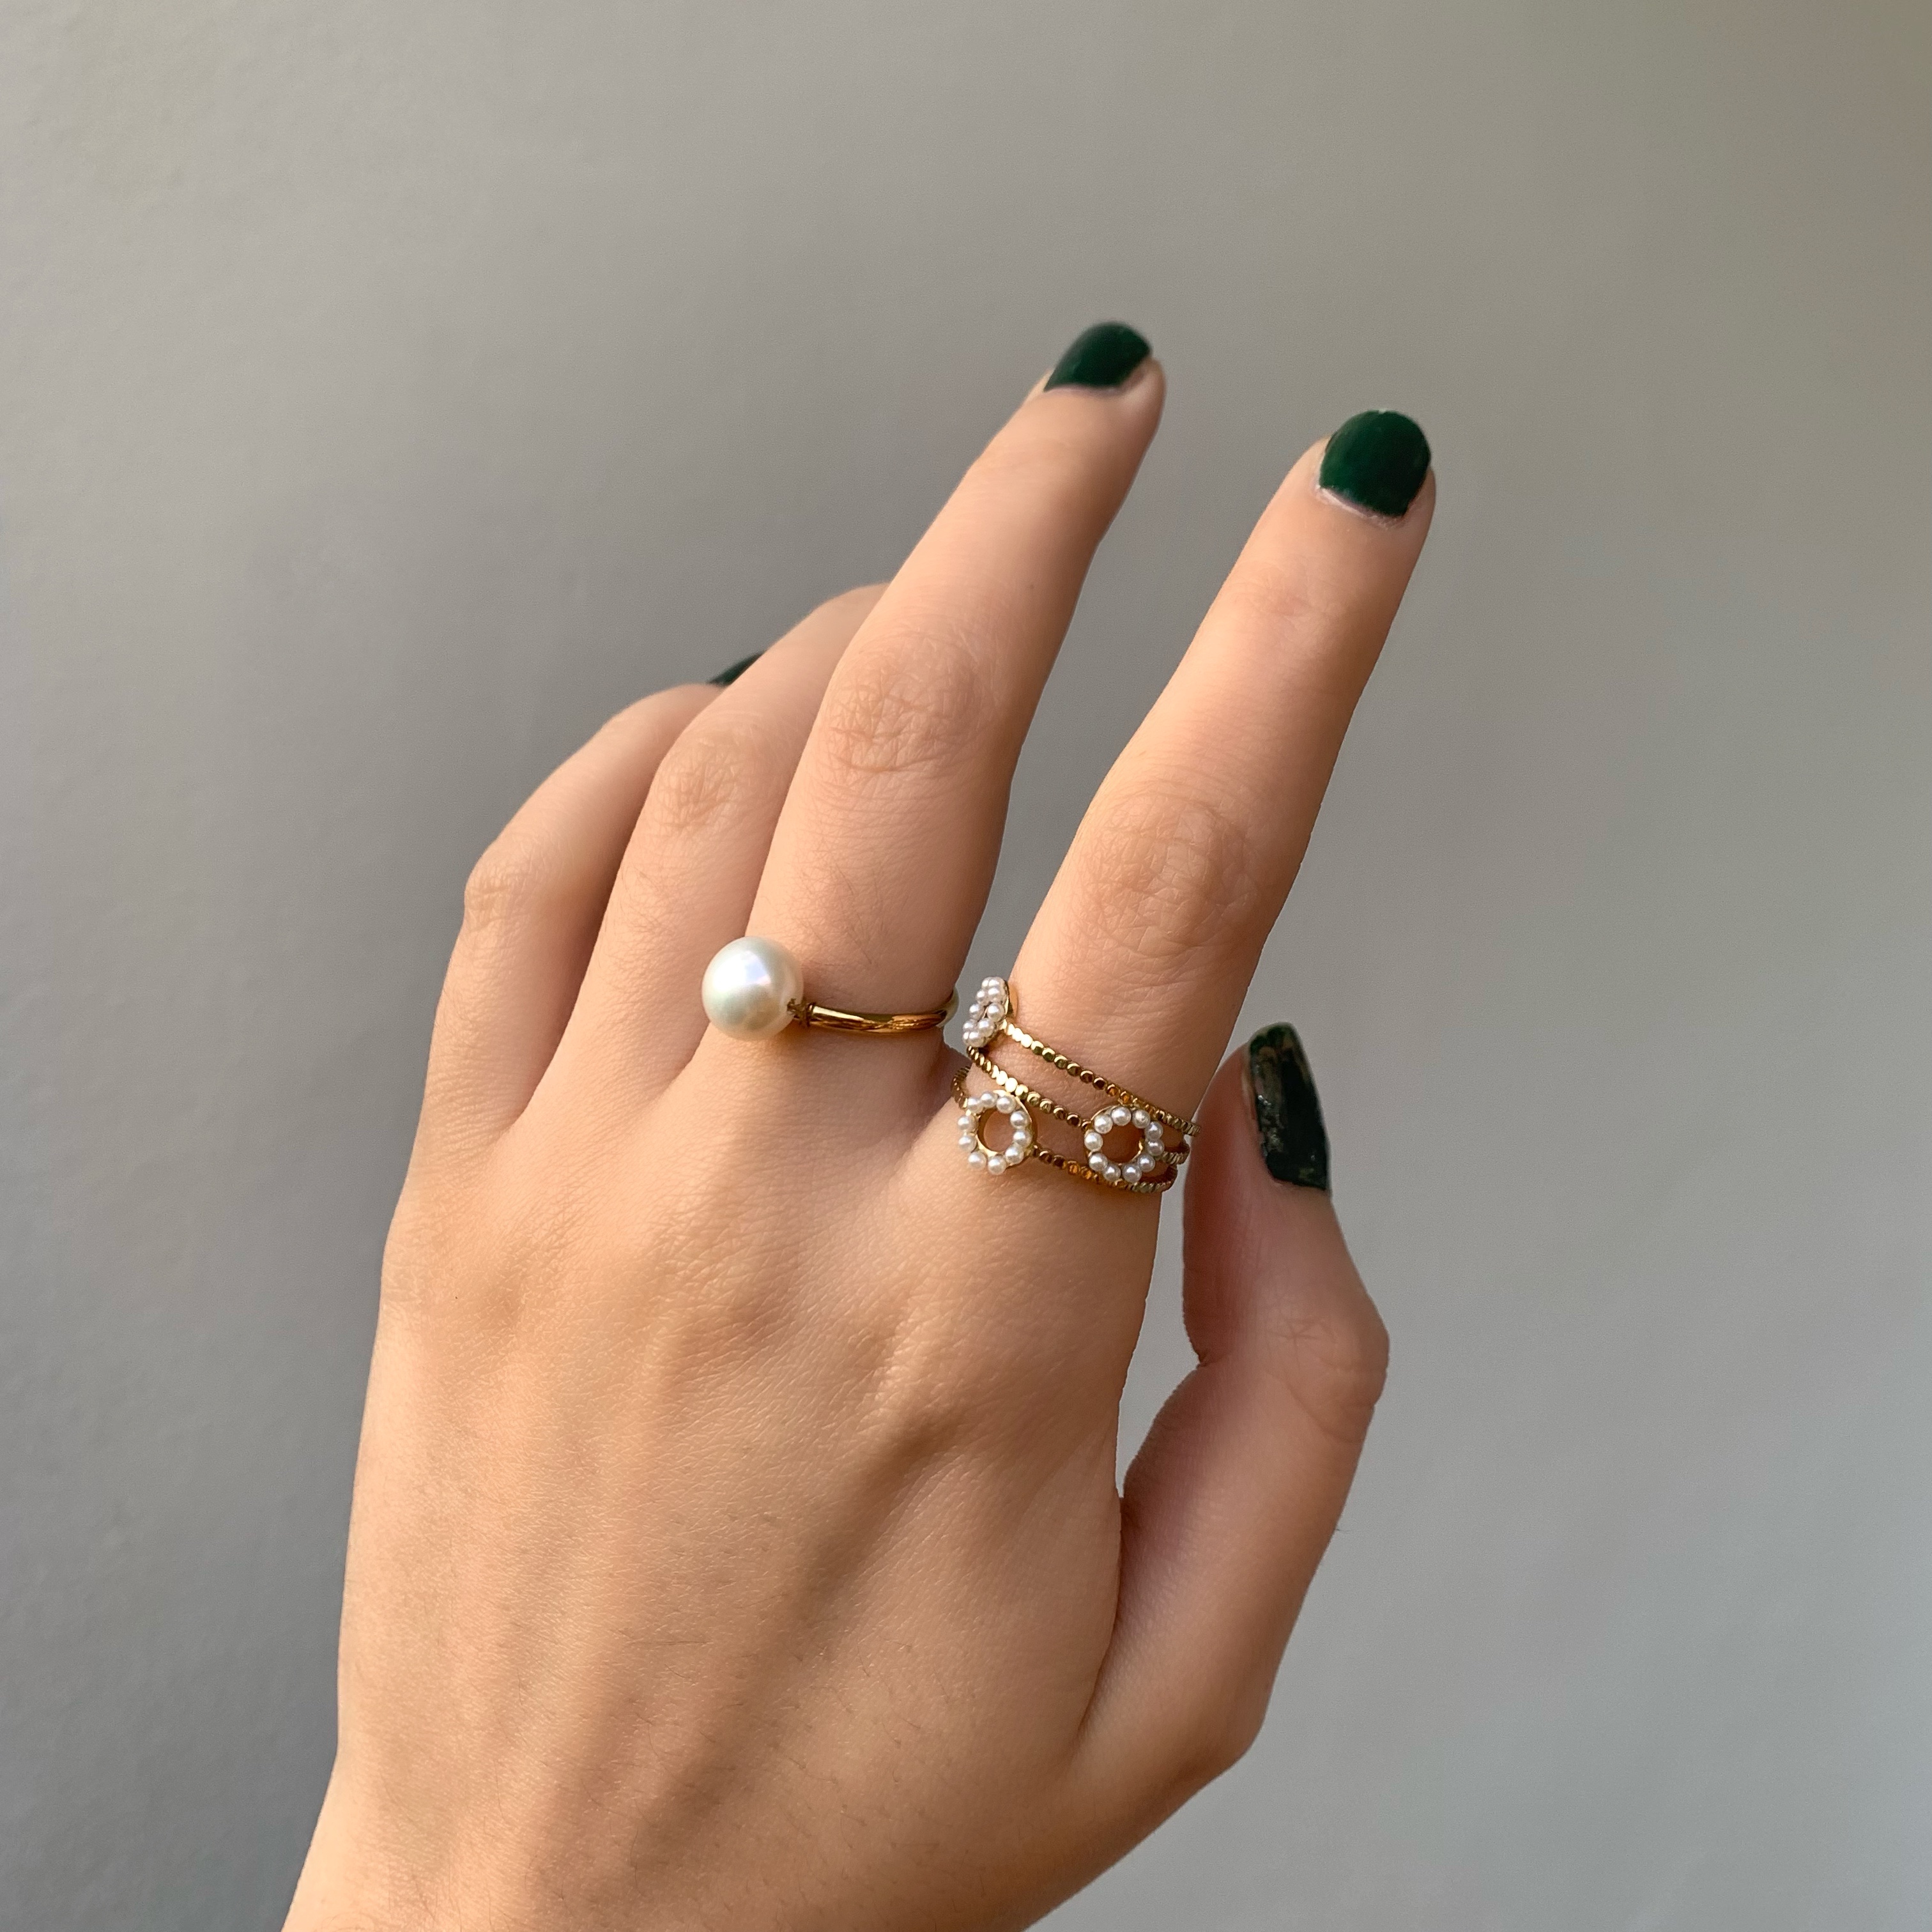 3 Tiny Pearl Rings Stainless Steel Ring